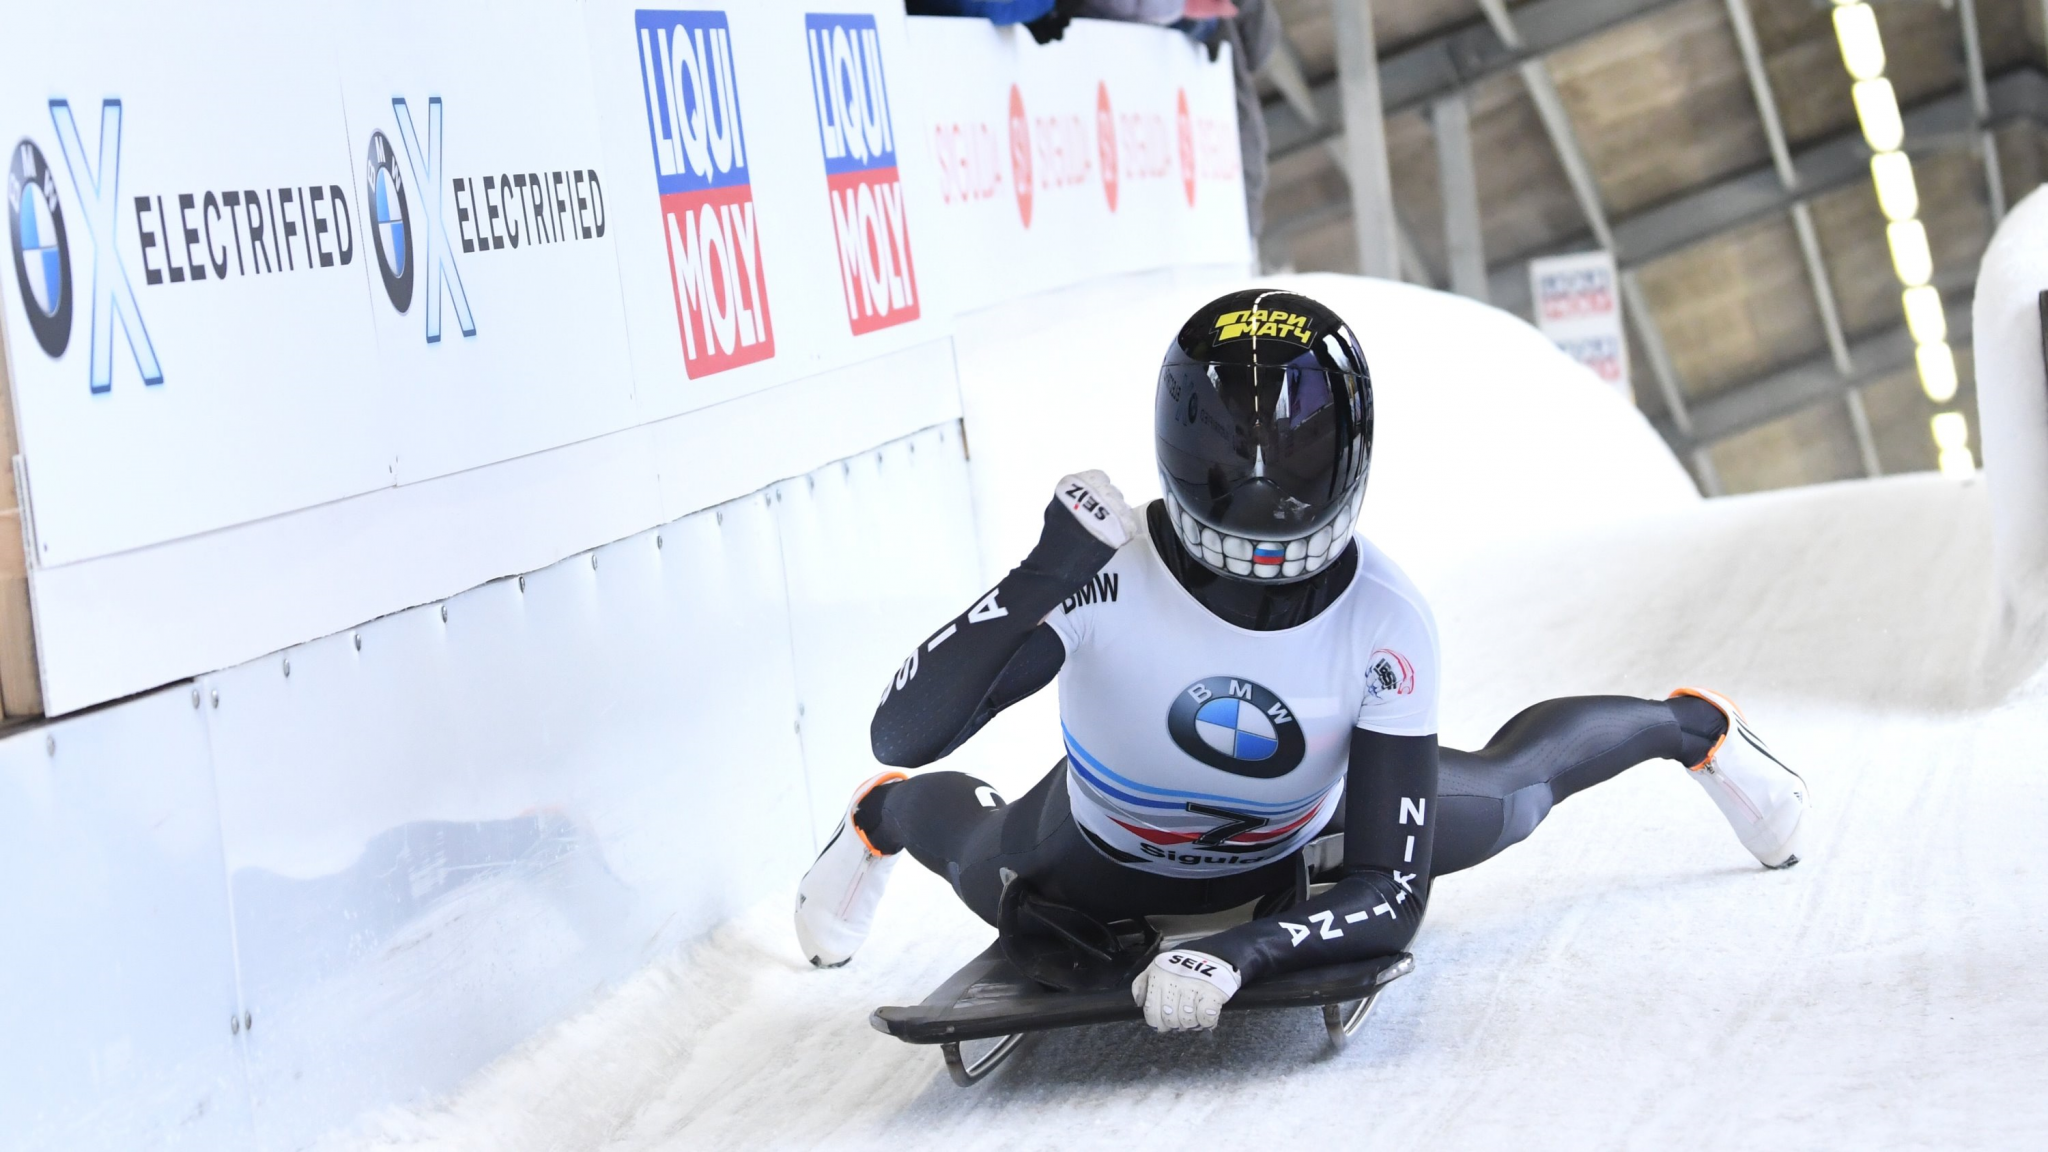 Elena Nikitina won her final race as the reigning World Cup champion ©IBSF/Viesturs Lacis